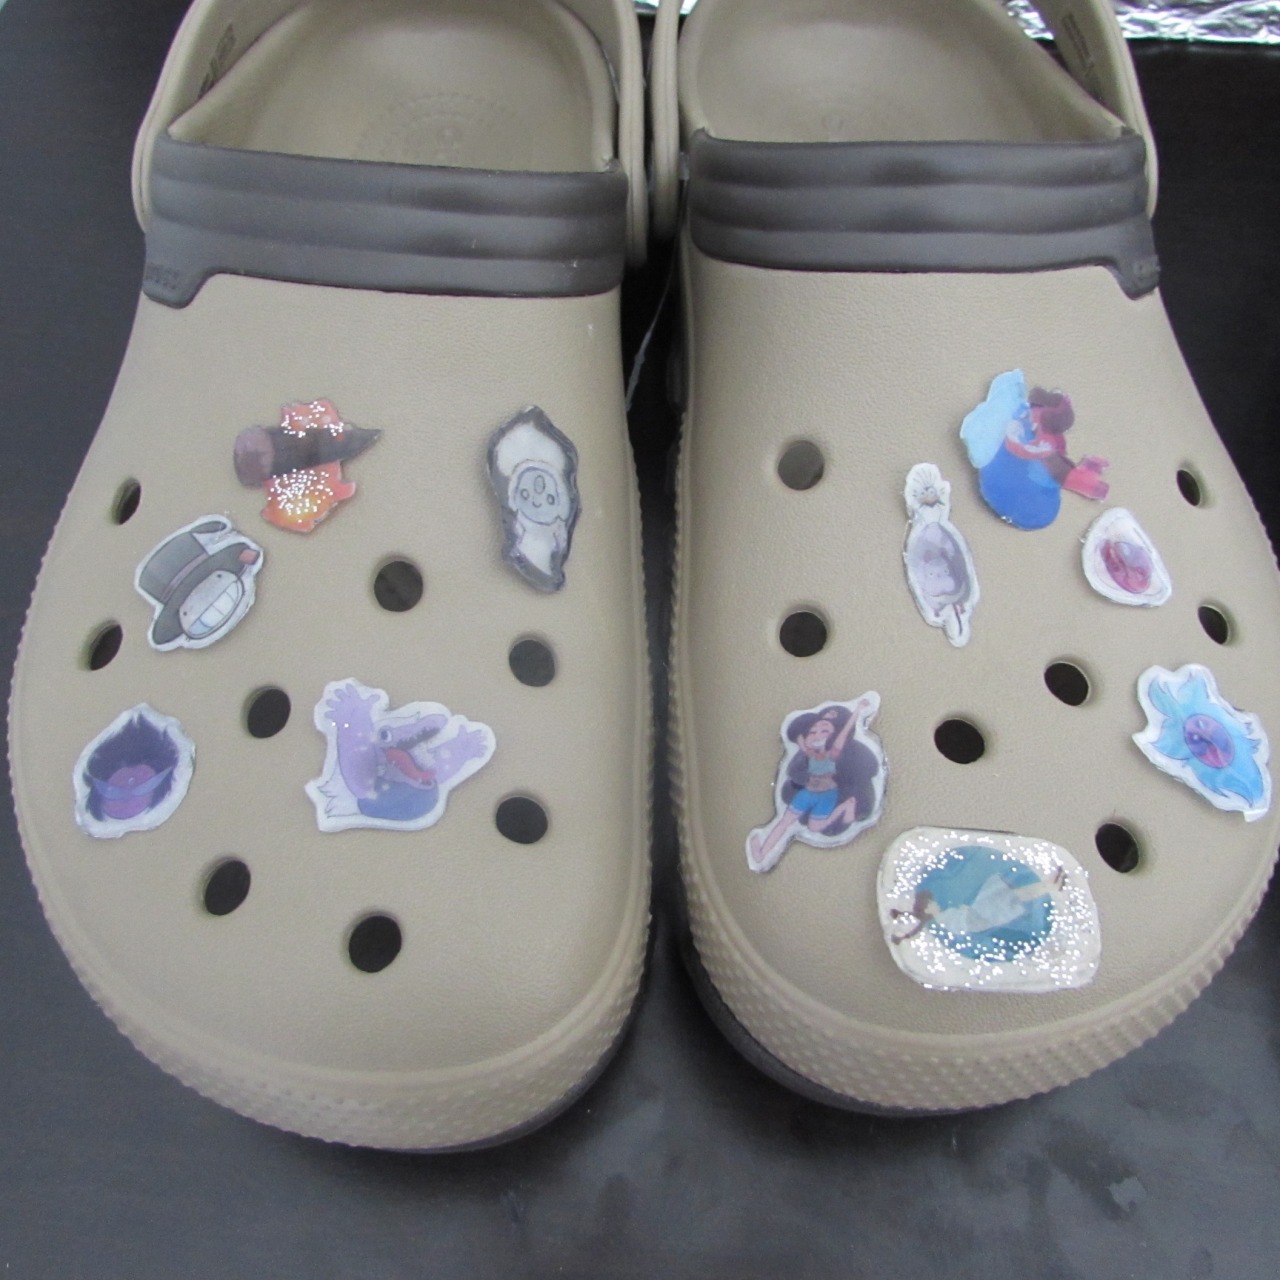 the things you put on crocs